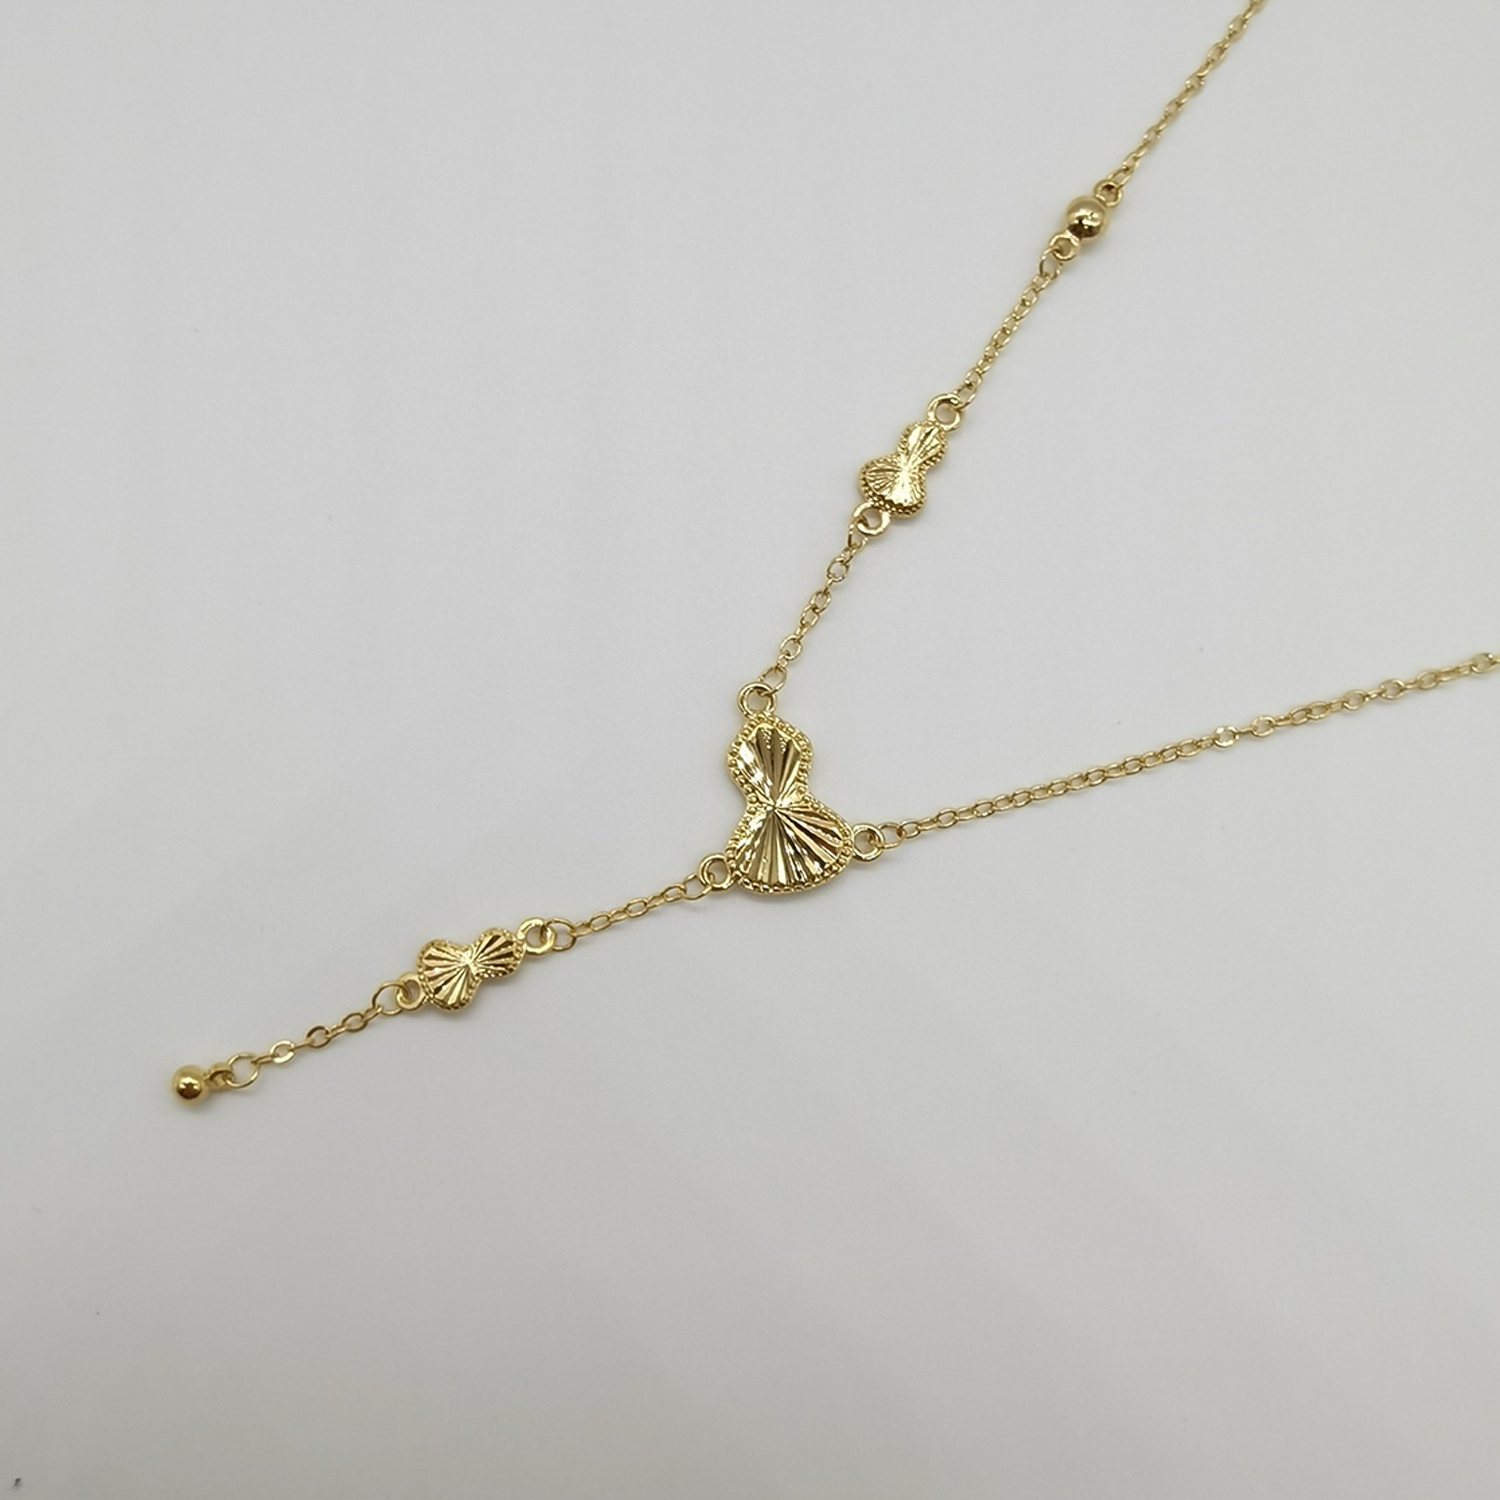 Alluvial gold vacuum electroplating 24K gold gourd tassel necklace